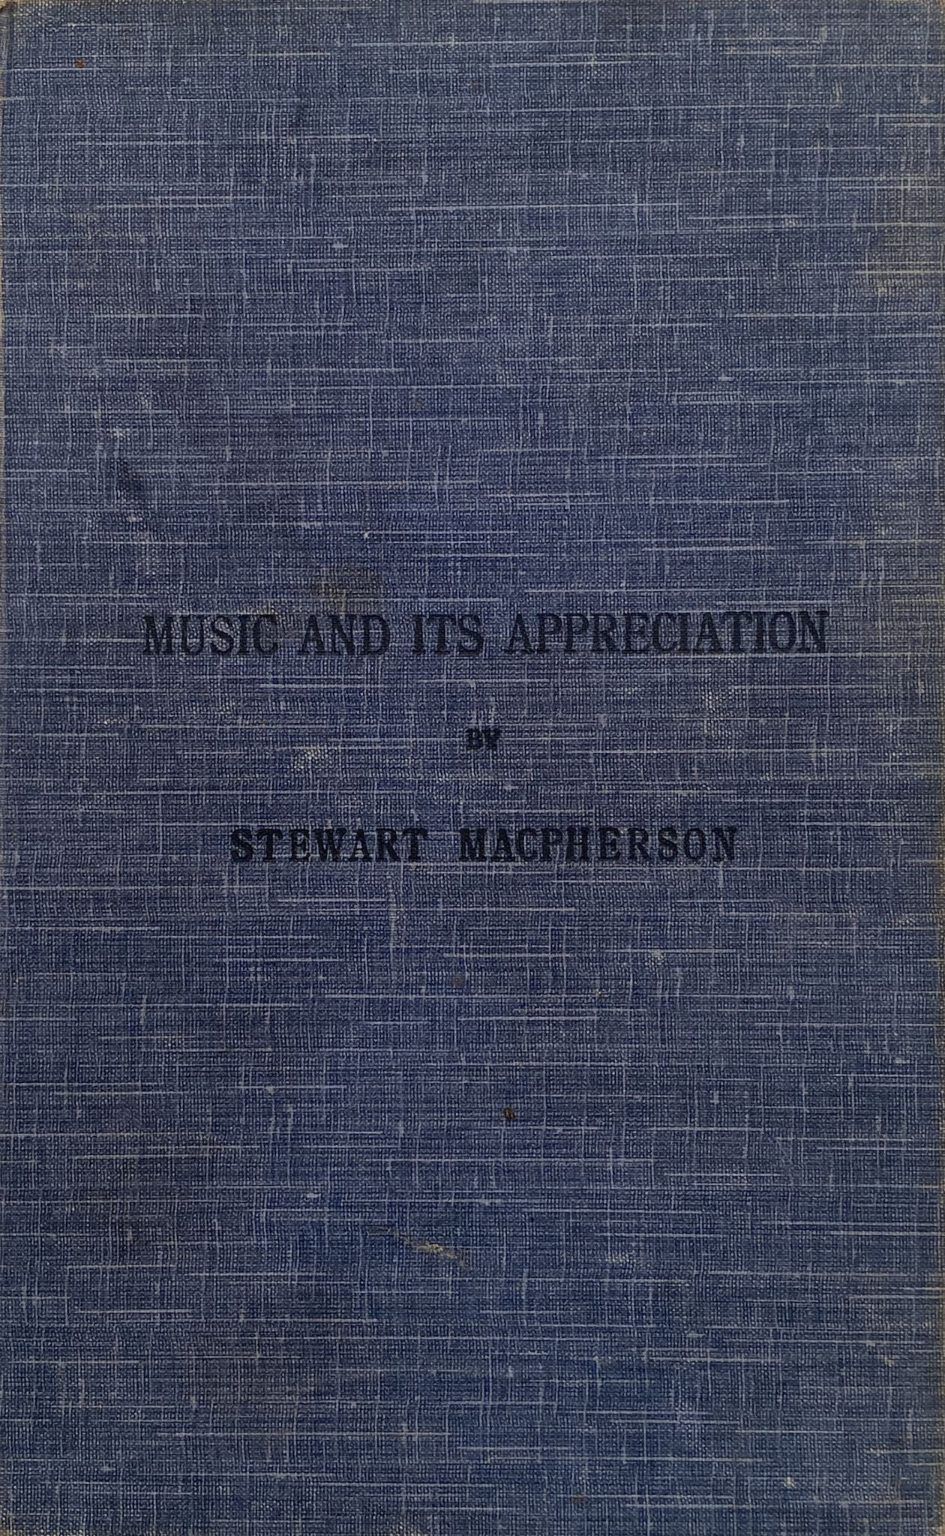 MUSIC AND ITS APPRECIATION